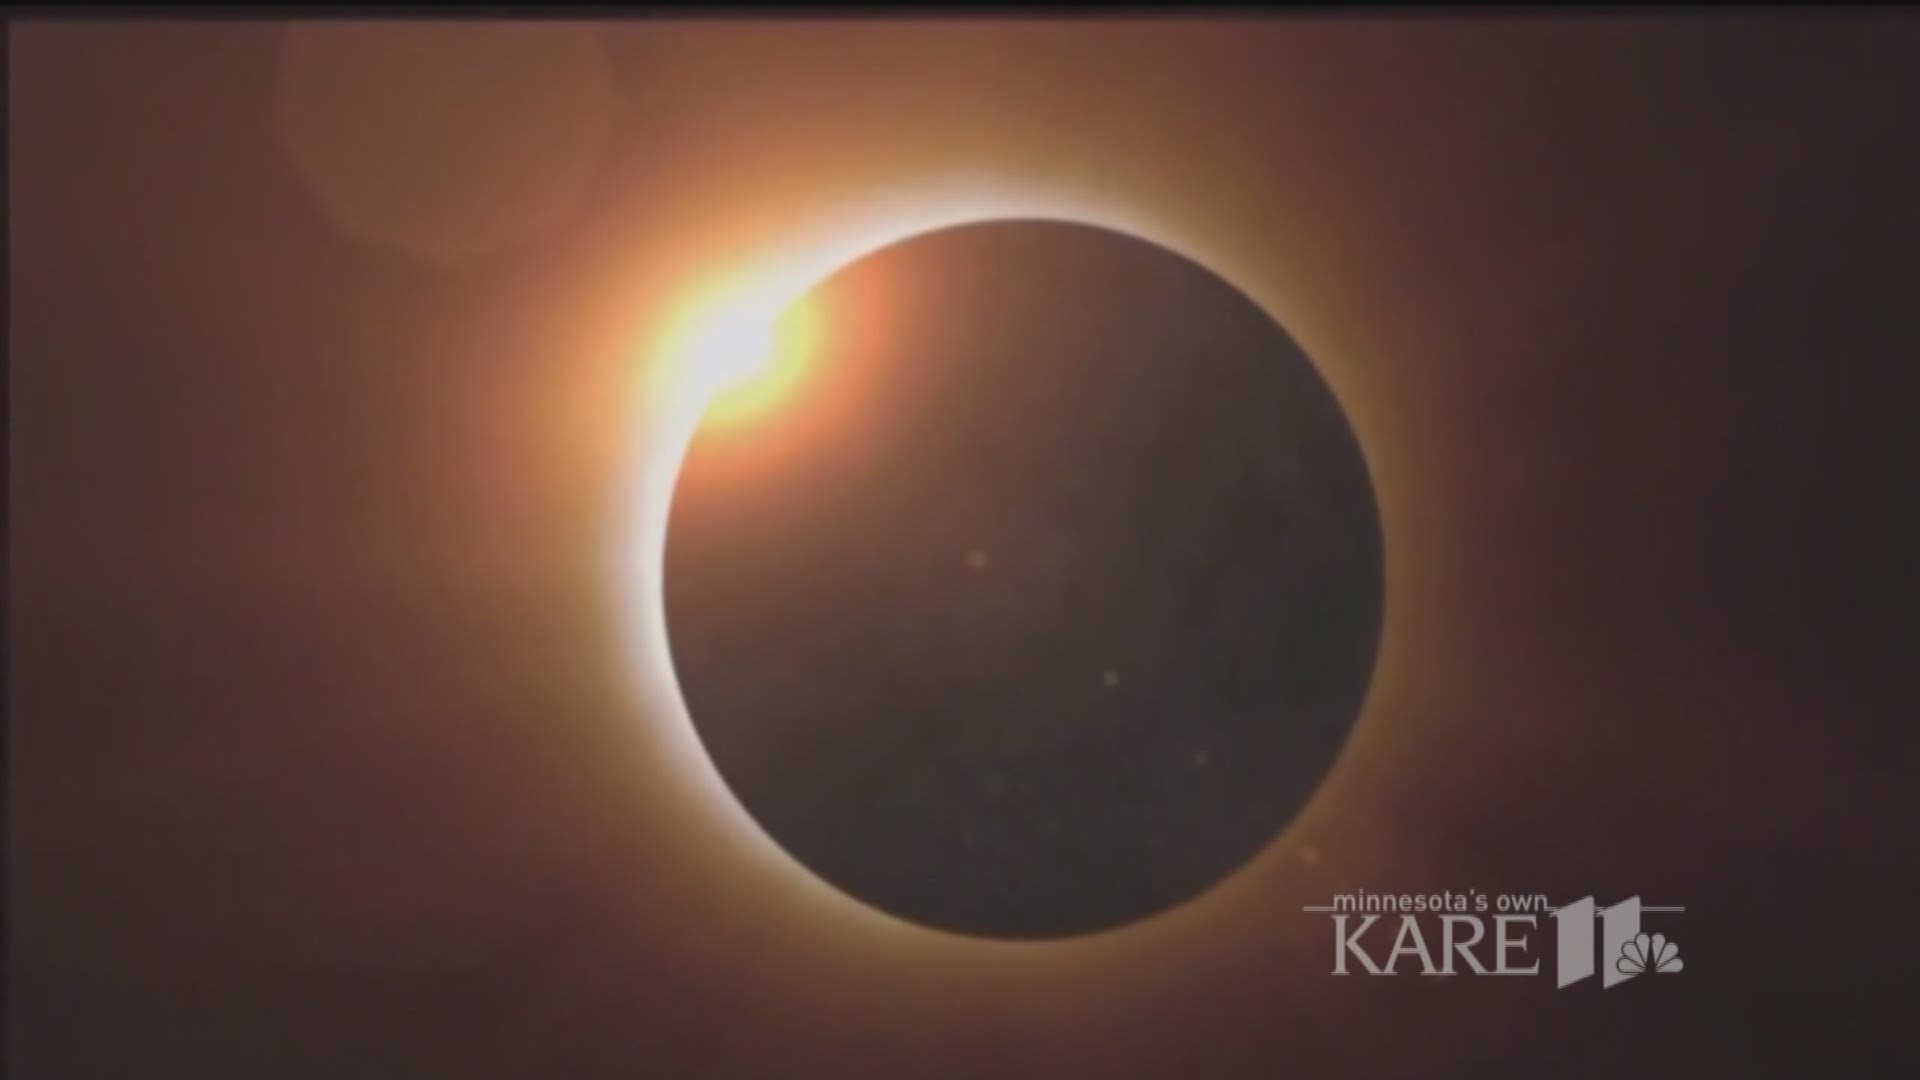 In the Twin Cities, we are expected to see an 83 percent eclipse beginning at 11:43 a.m., peaking at 1:06 p.m., and ending at about 2:30 p.m. Heidi Wigdahl has some tips and tricks to see the sight -- while staying safe. http://kare11.tv/2fYfm9N